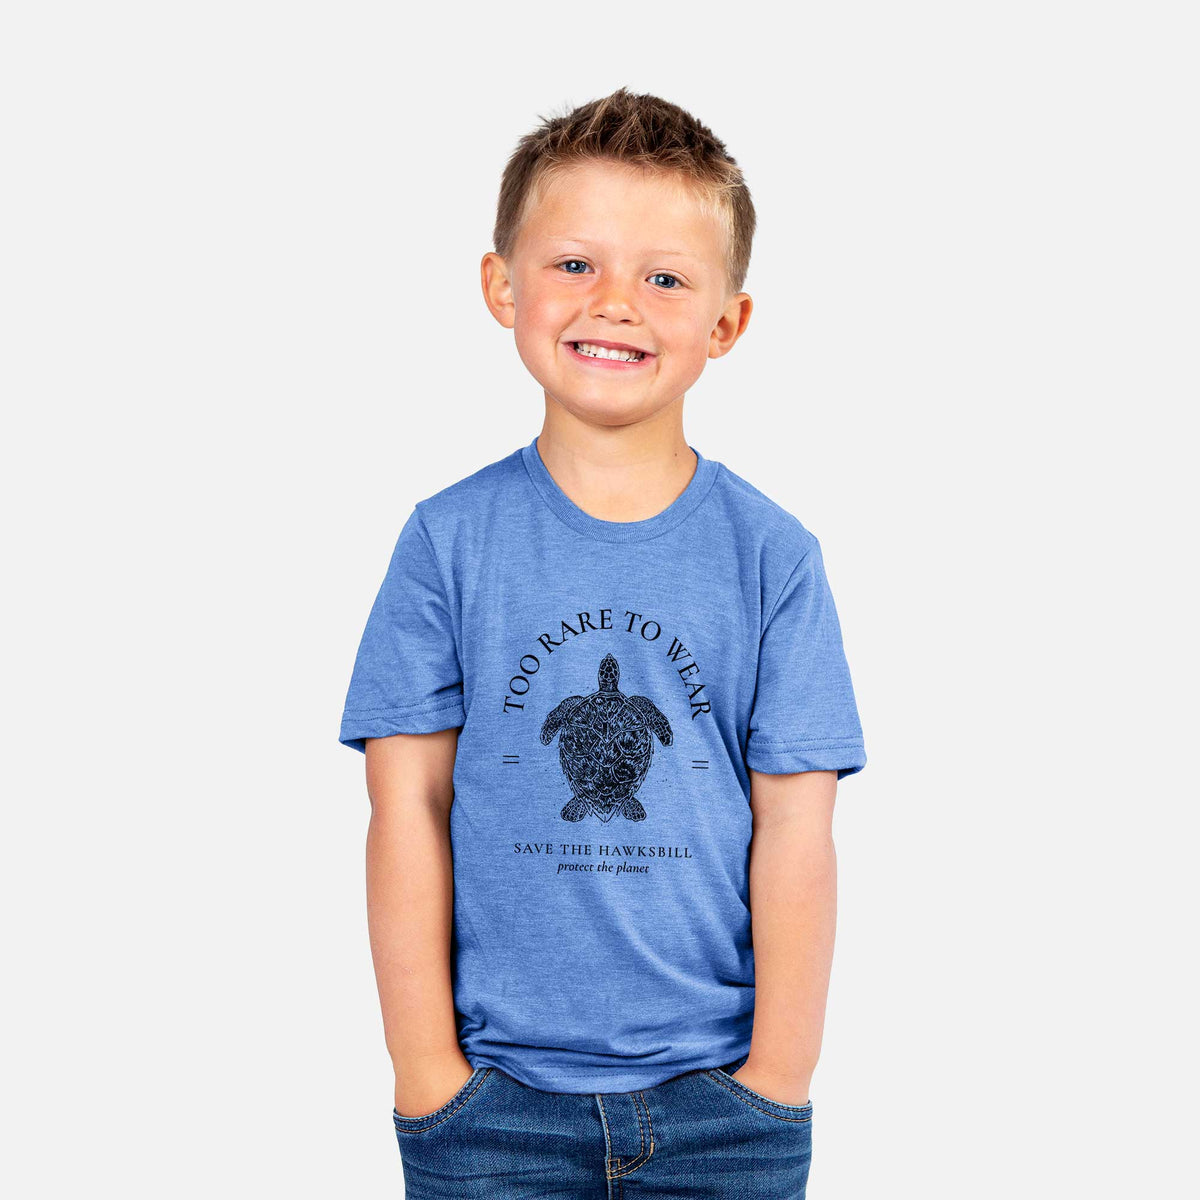 Too Rare to Wear - Save the Hawksbill - Kids Shirt